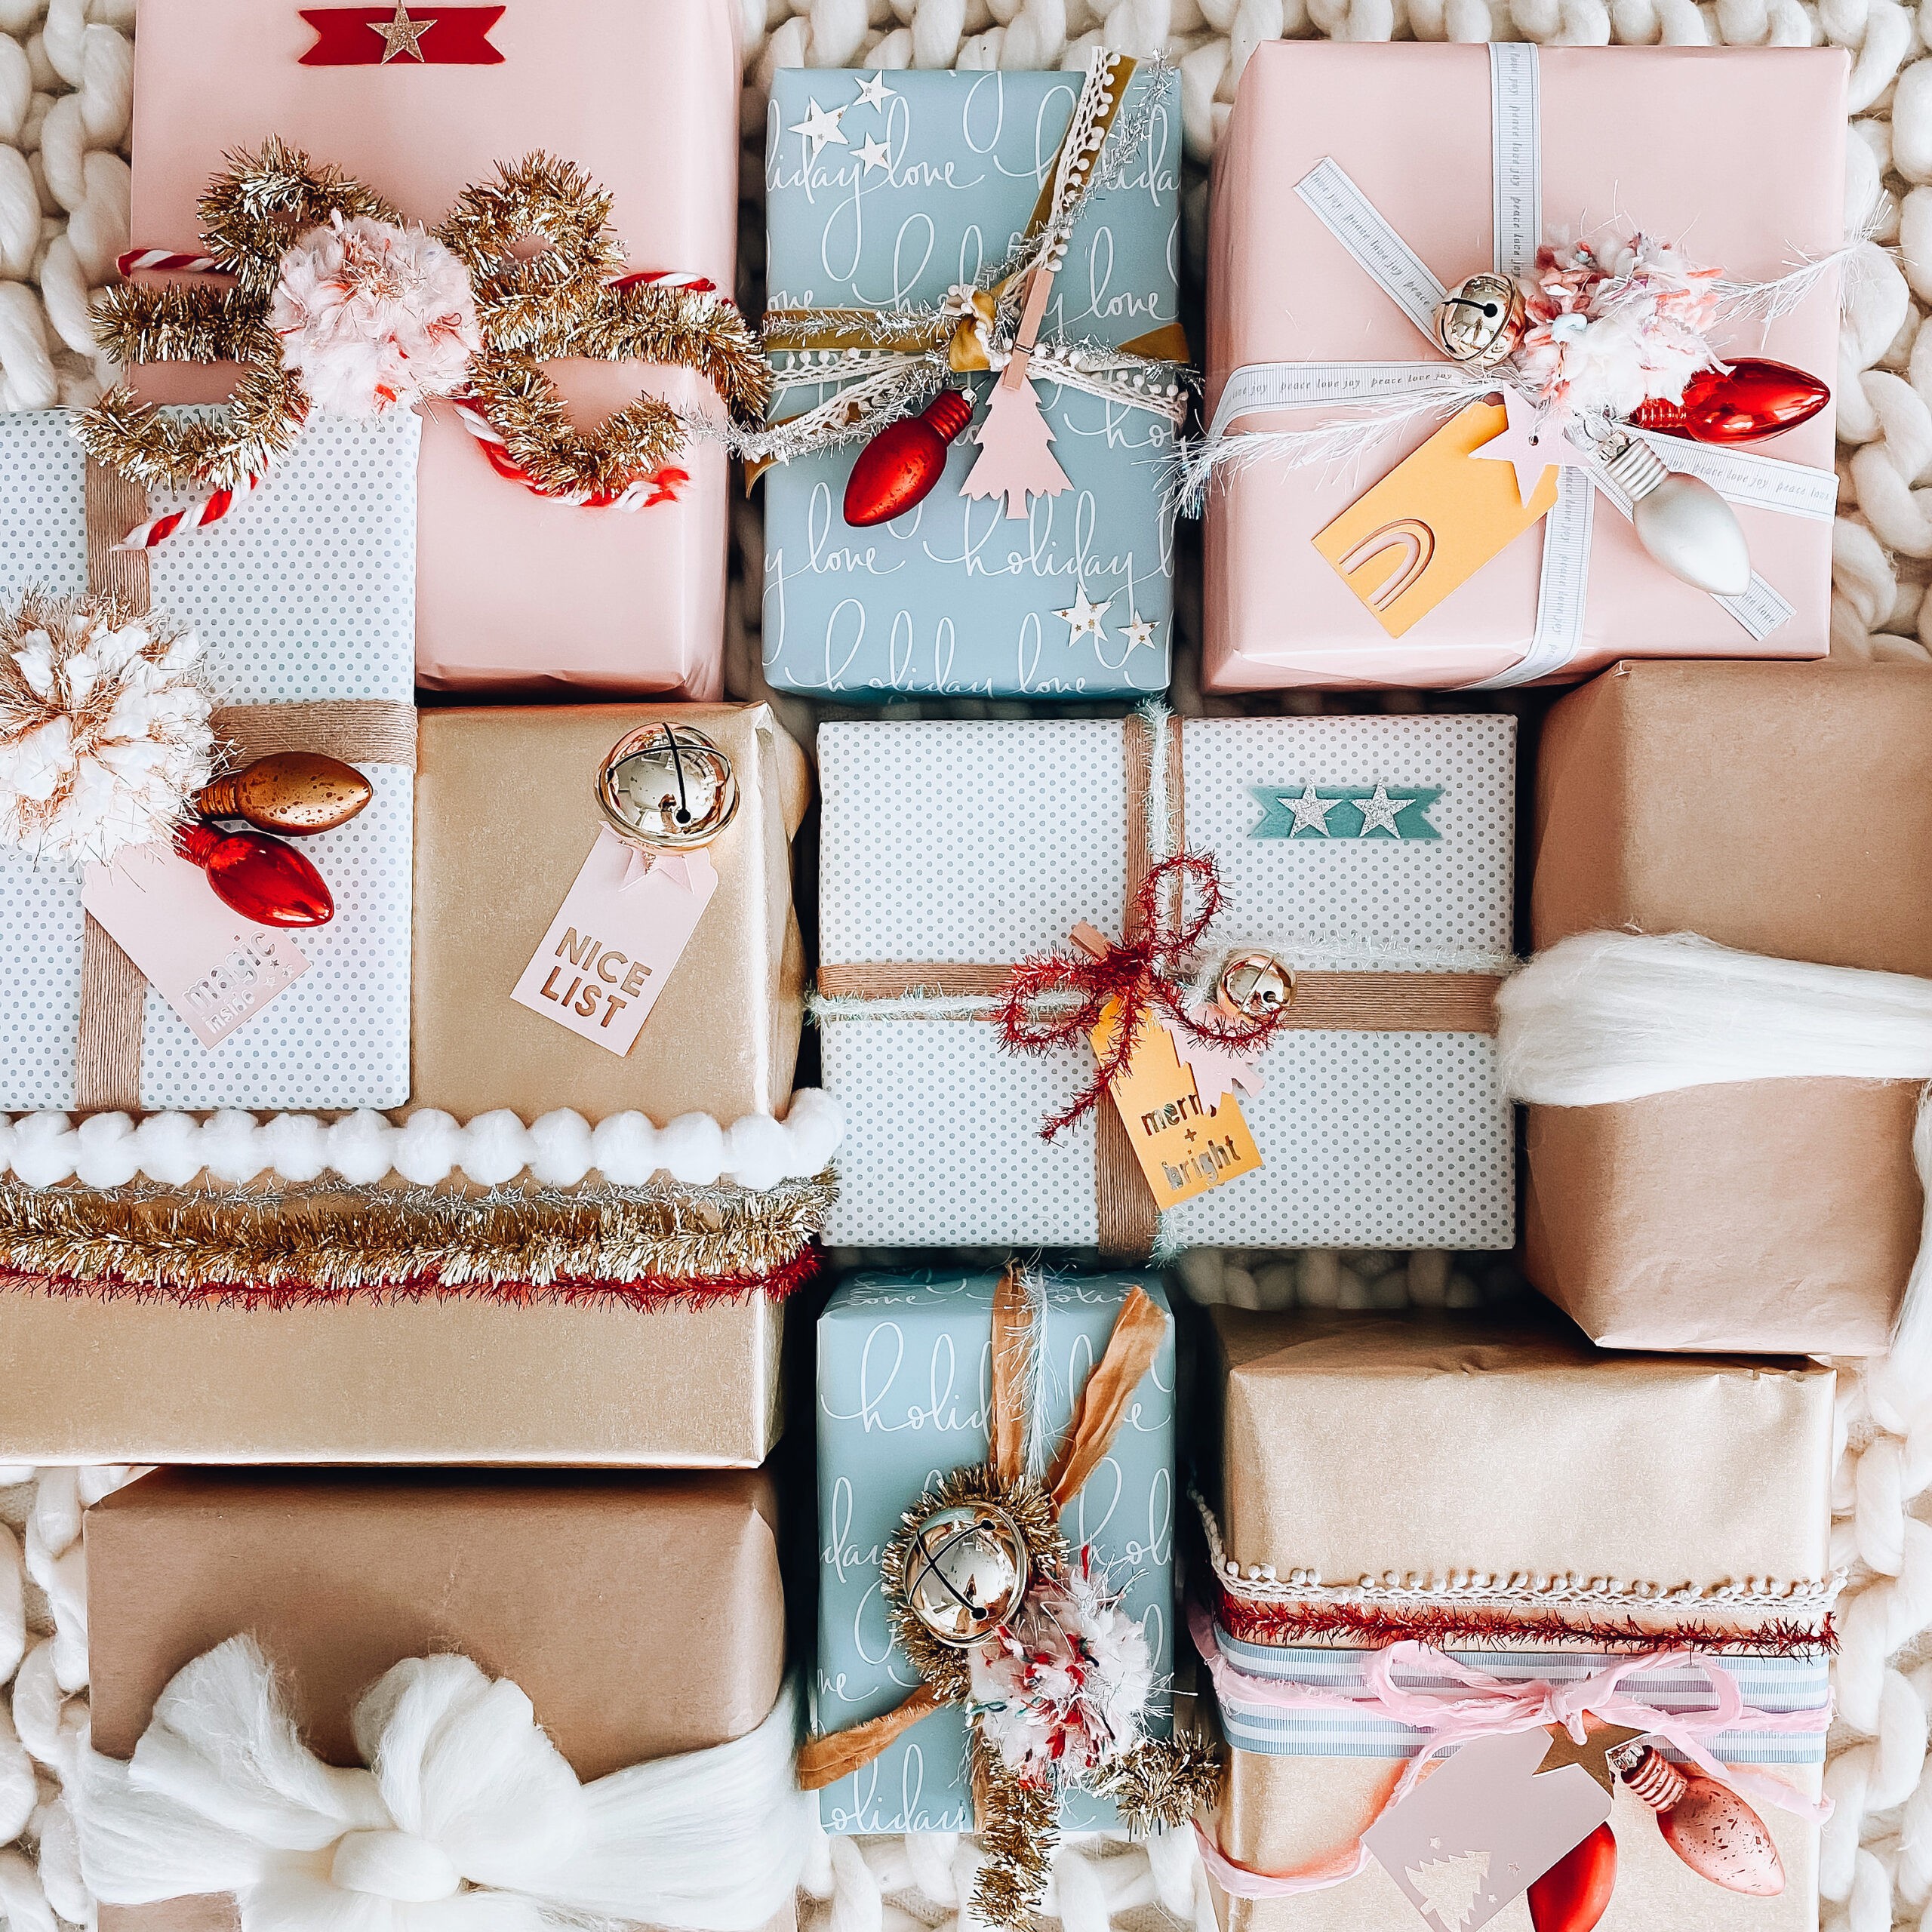 Gifts for Her Gift Guide - Stephanie Hanna Blog